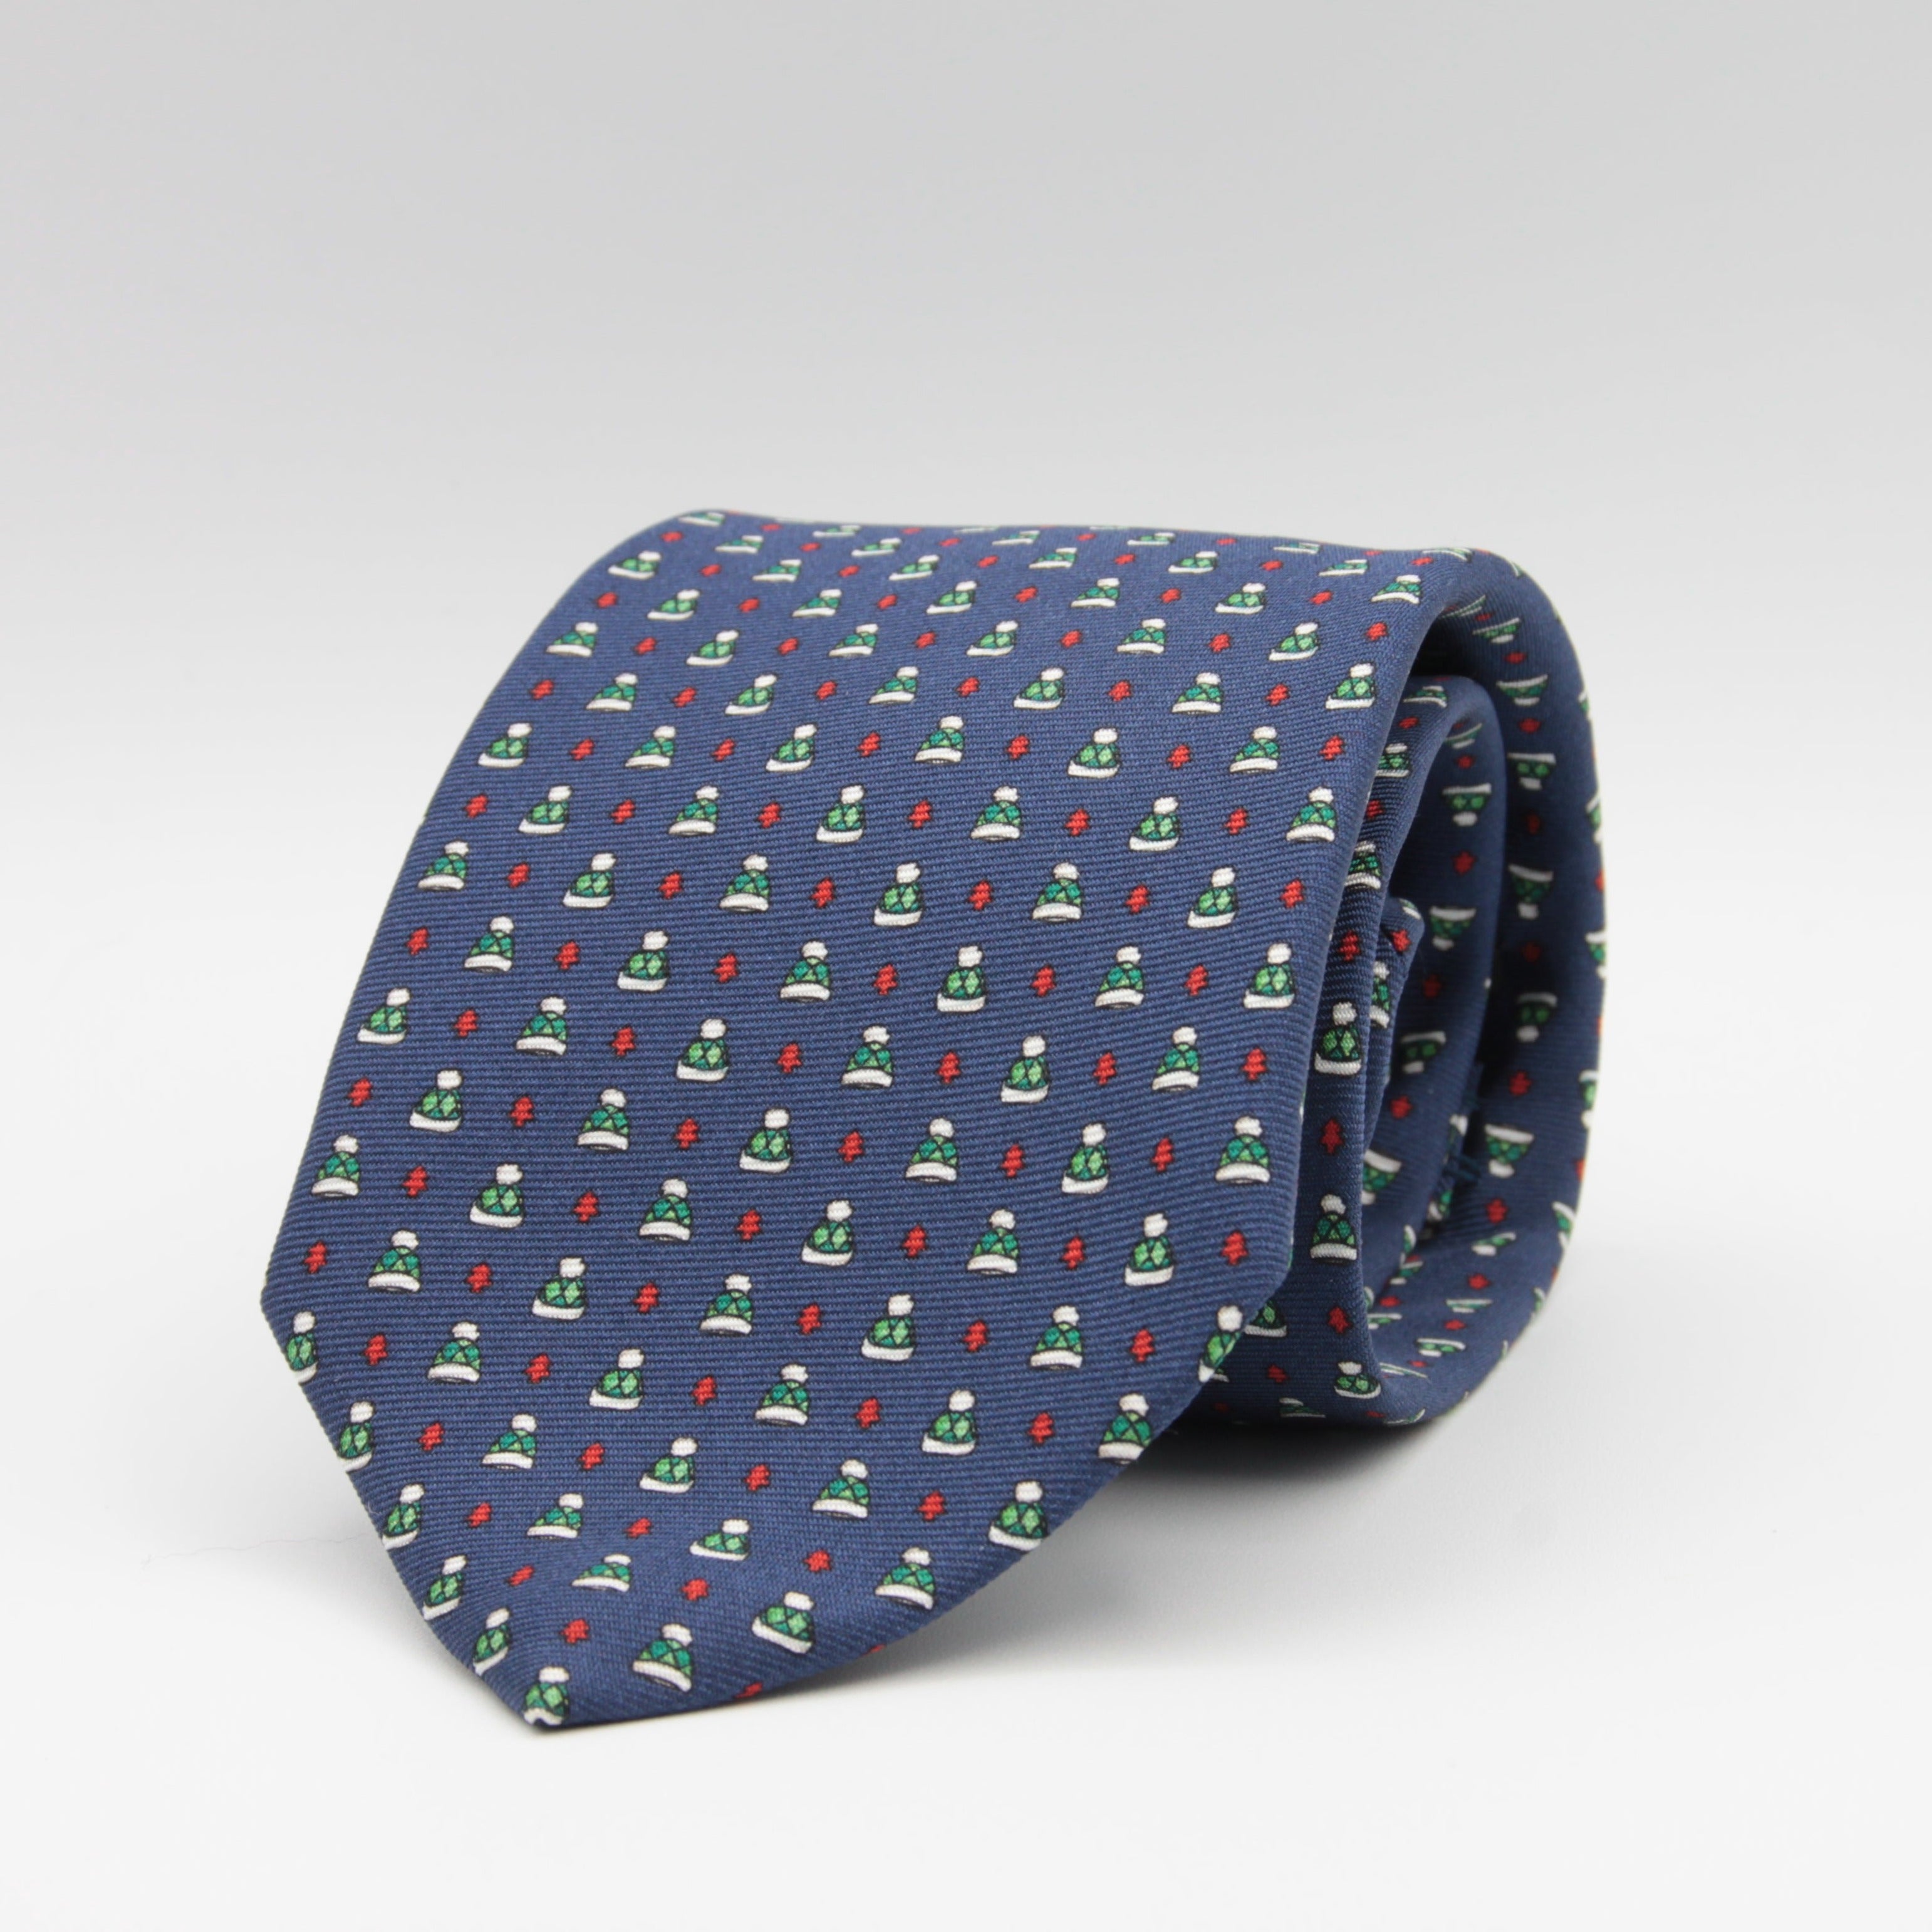 Holliday & Brown for Cruciani & Bella 100% printed Silk Self tipped Blue with green caps tie Handmade in Italy 8 cm x 150 cm #1529